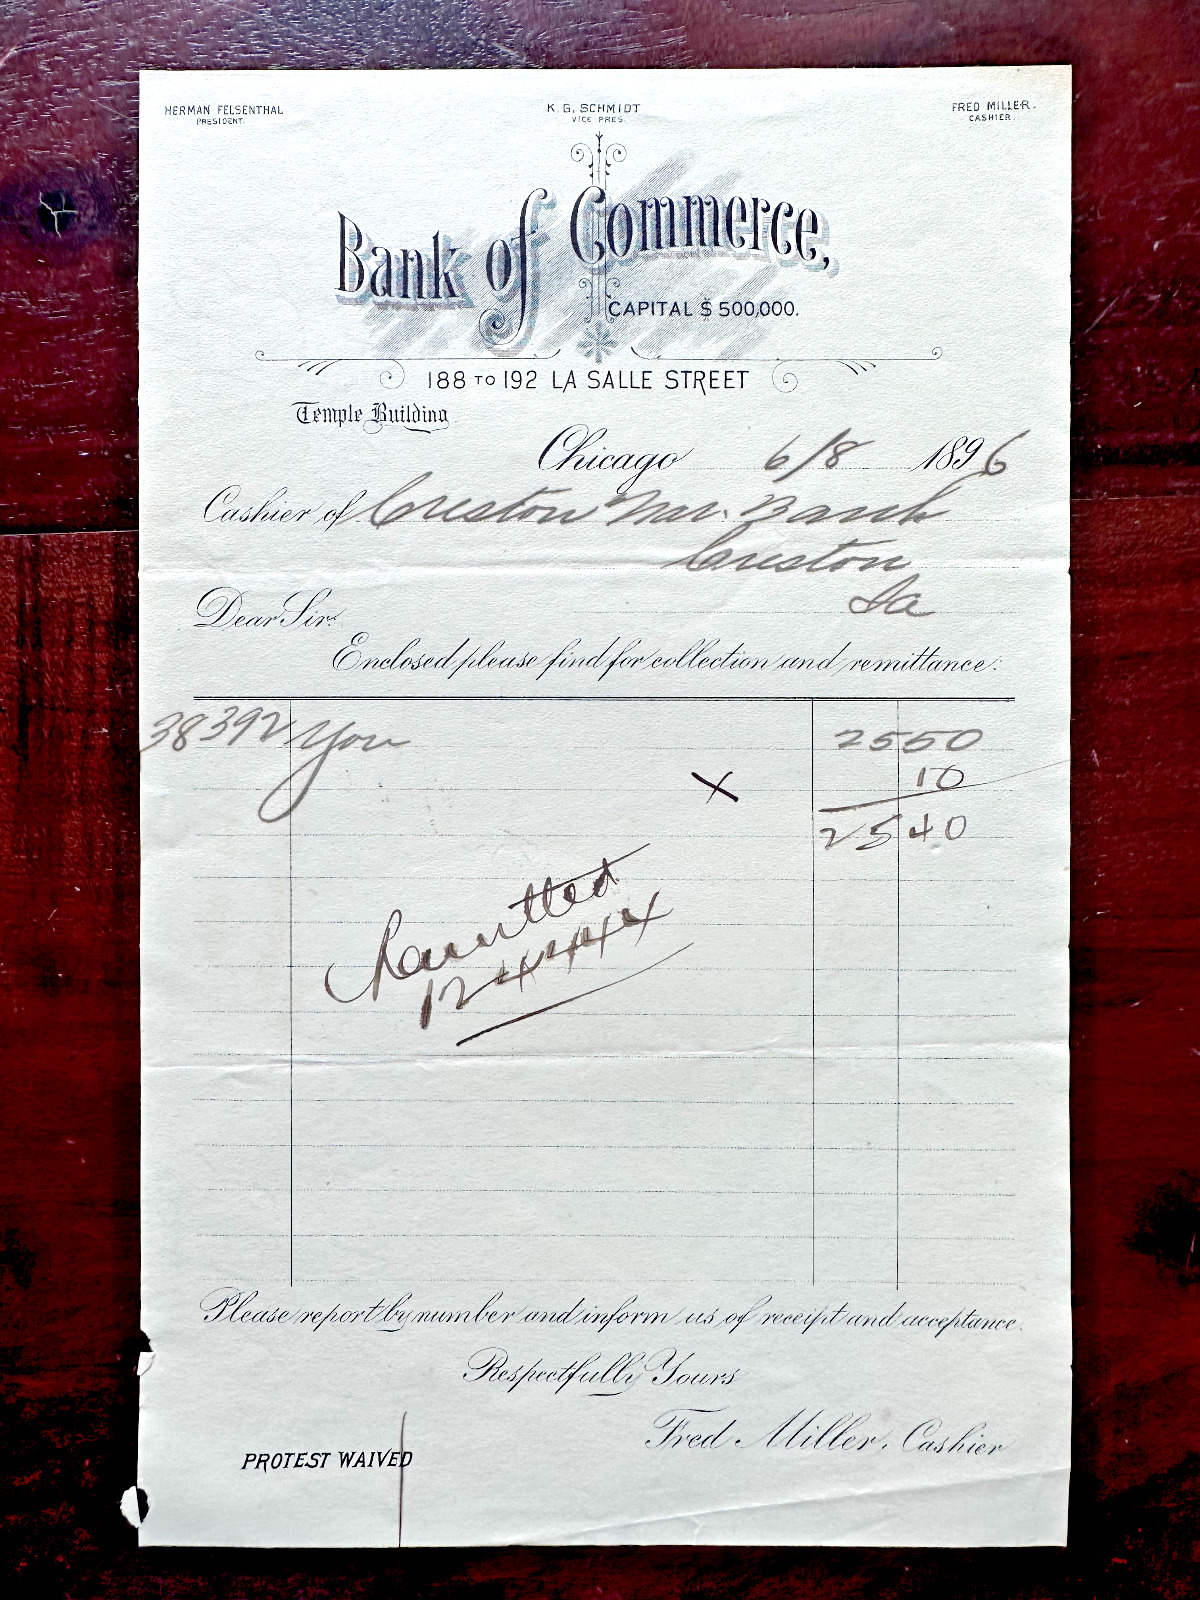 ANTIQUE 1896 CHICAGO, IL BANK OF COMMERCE RECEIPT $25.40 BANK DRAFT? - FP45